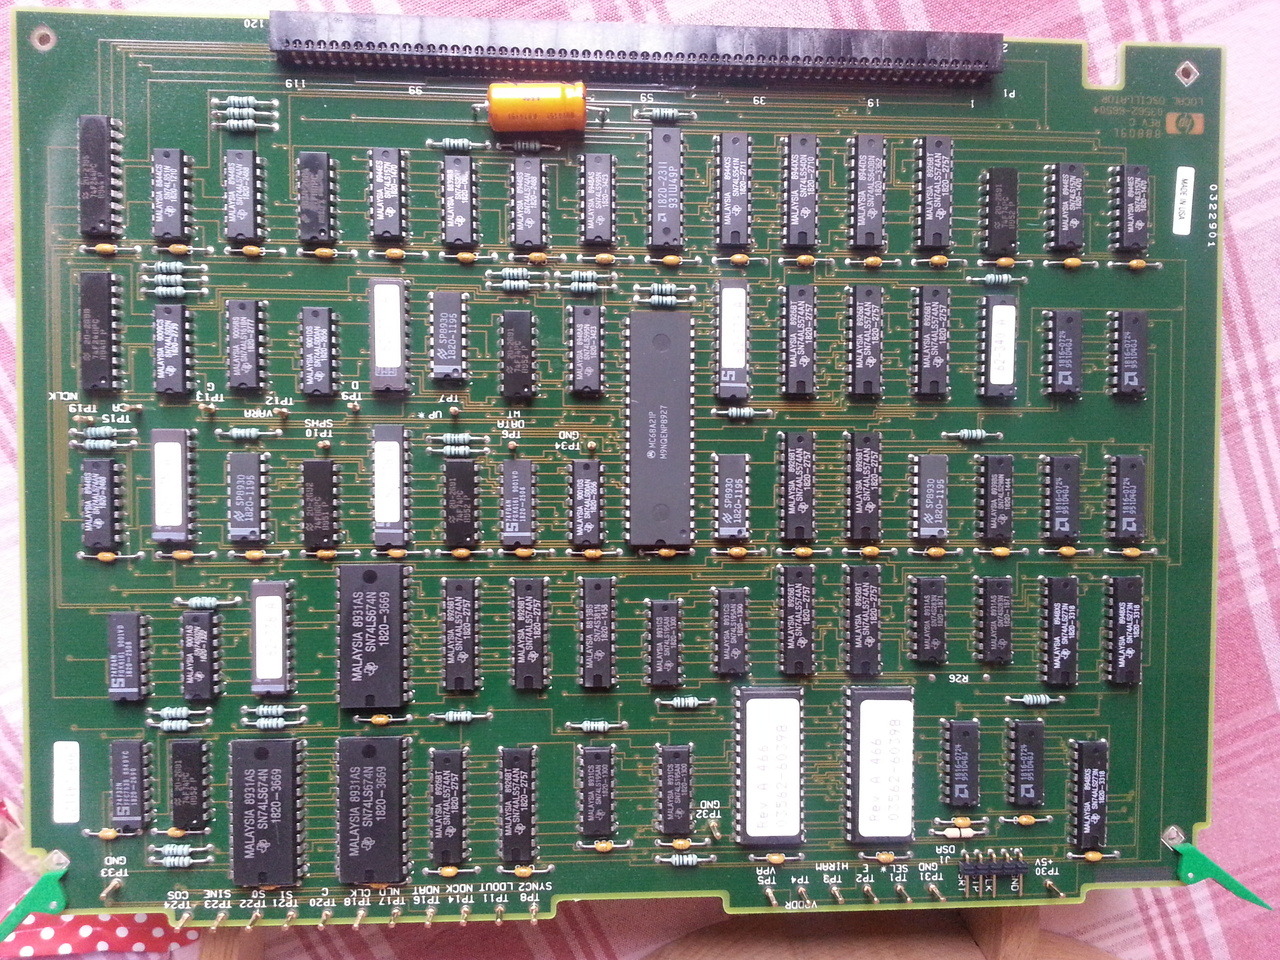 Picture of the A4 bloard of the HP3562A